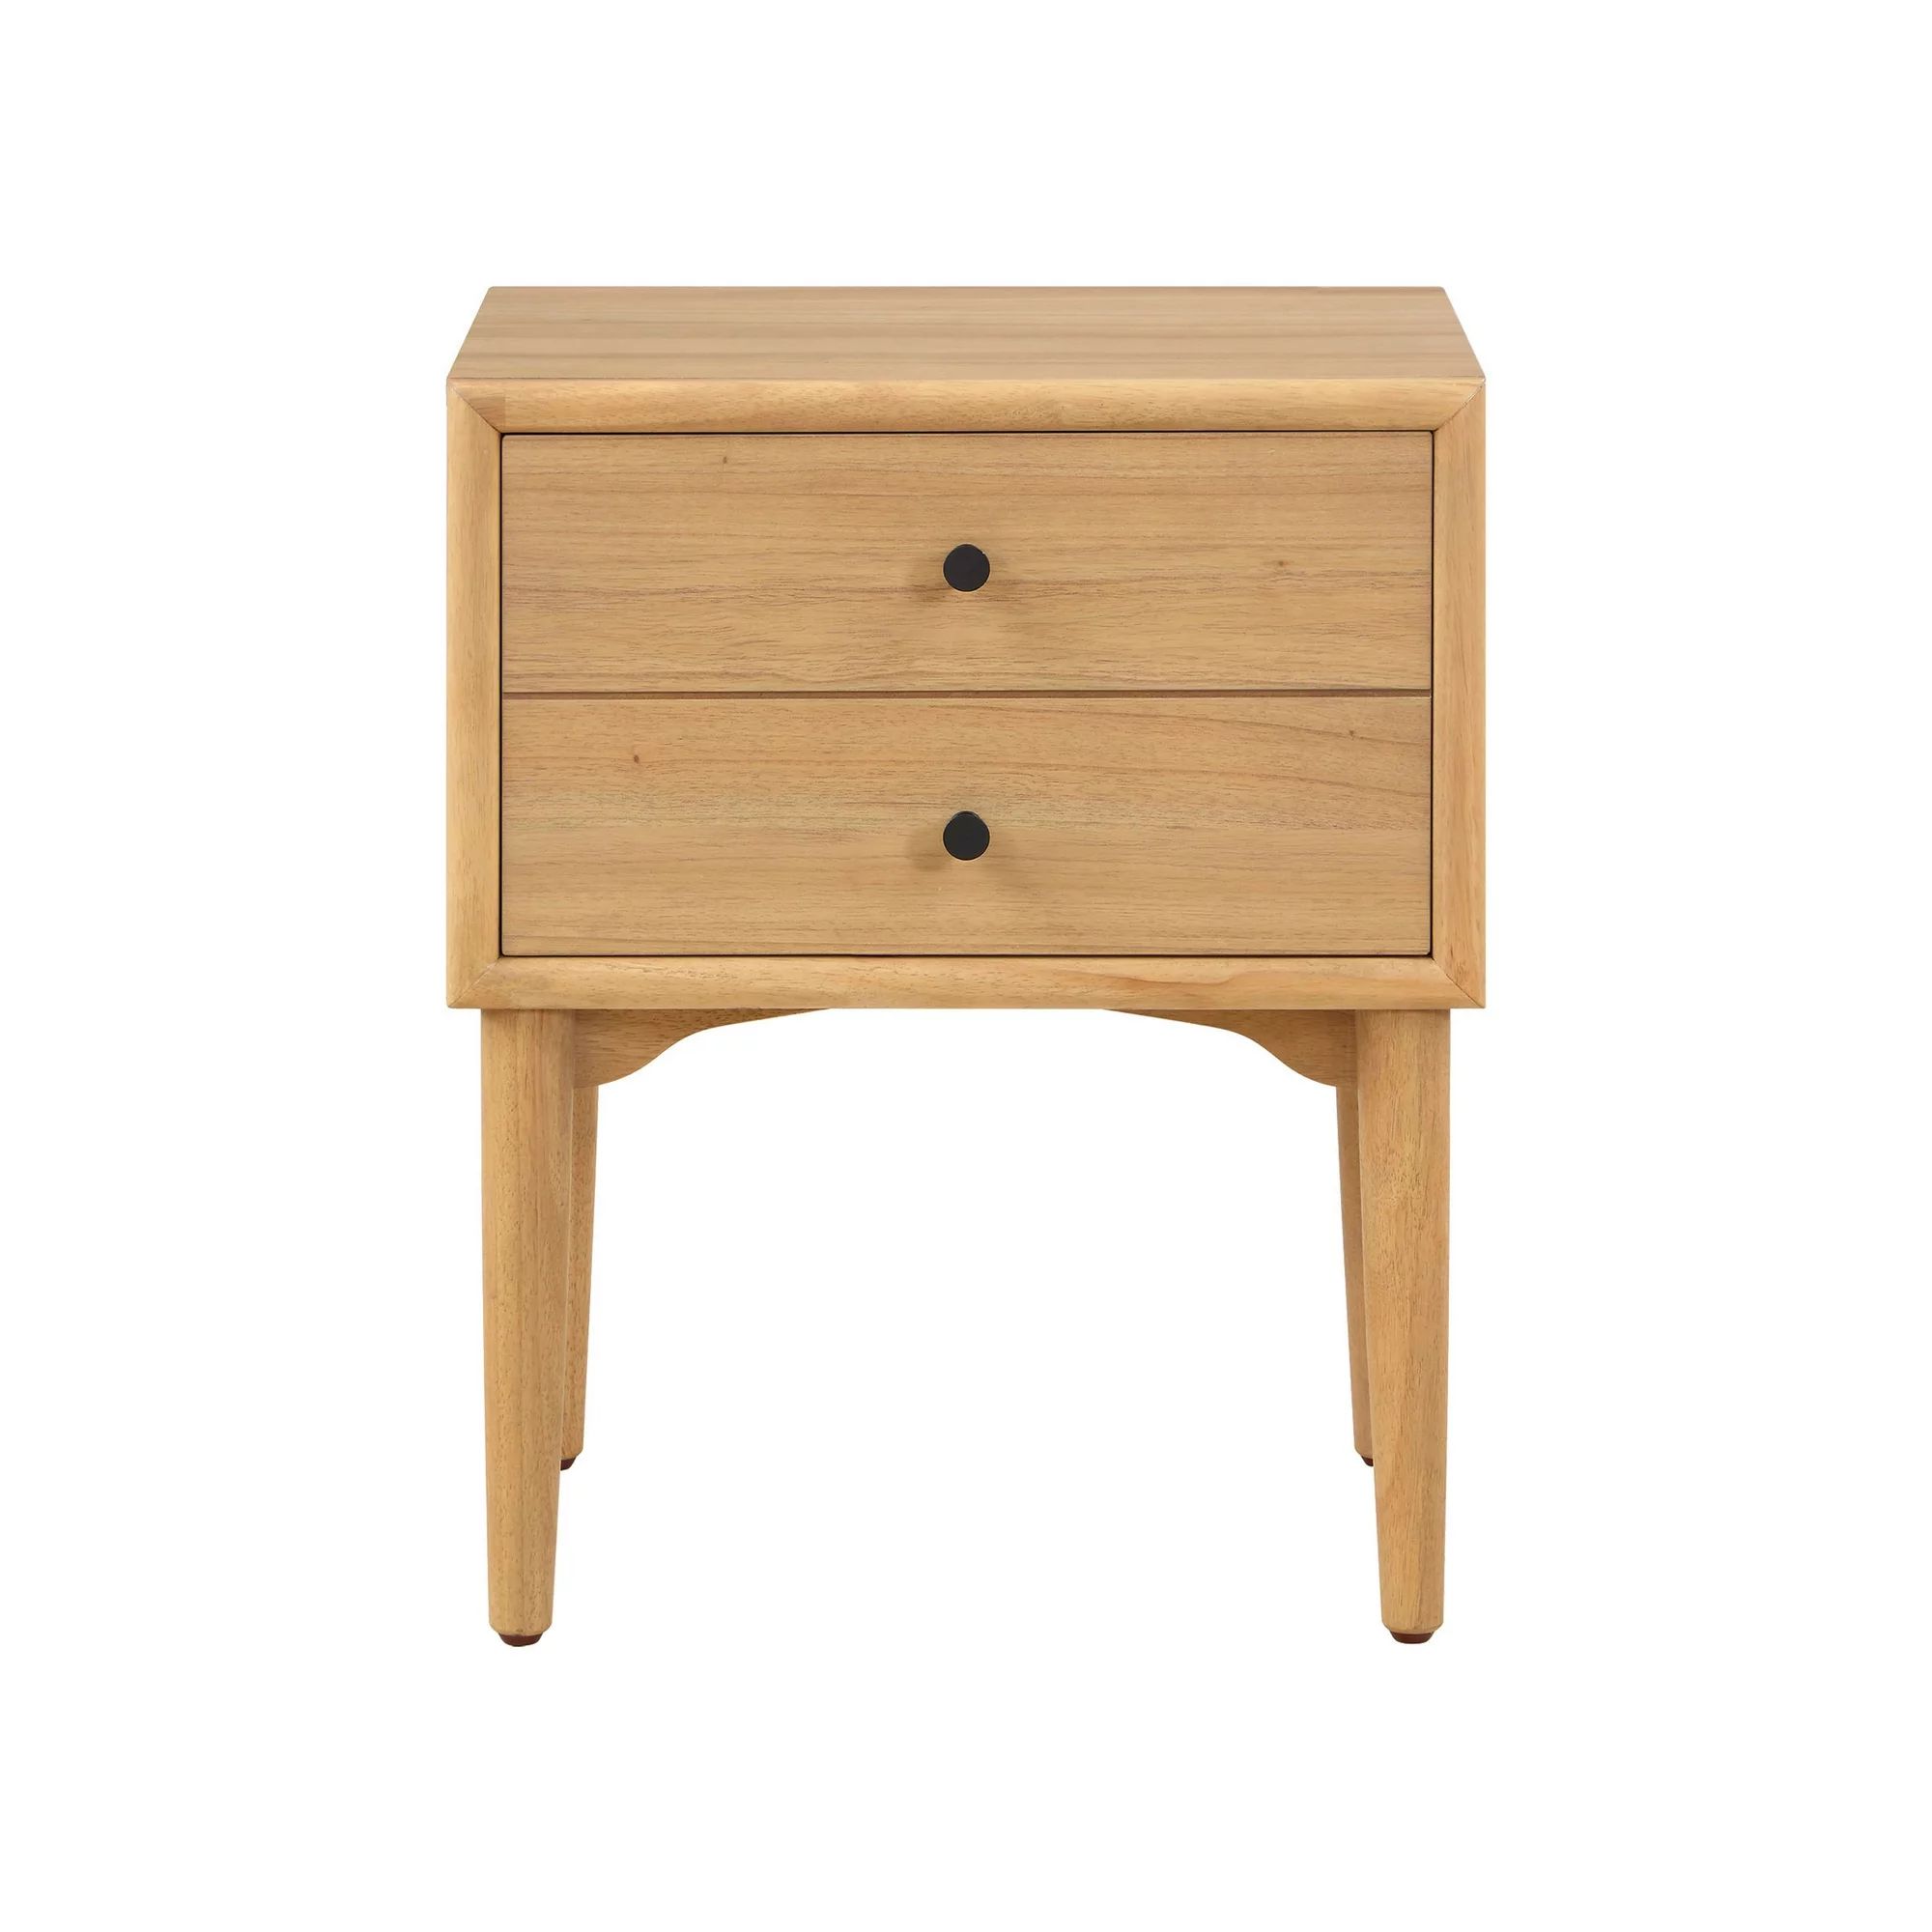 Better Homes & Gardens Bristol Nightstand with Solid Wood Frame, Natural Oak finish, by Dave & Je... | Walmart (US)